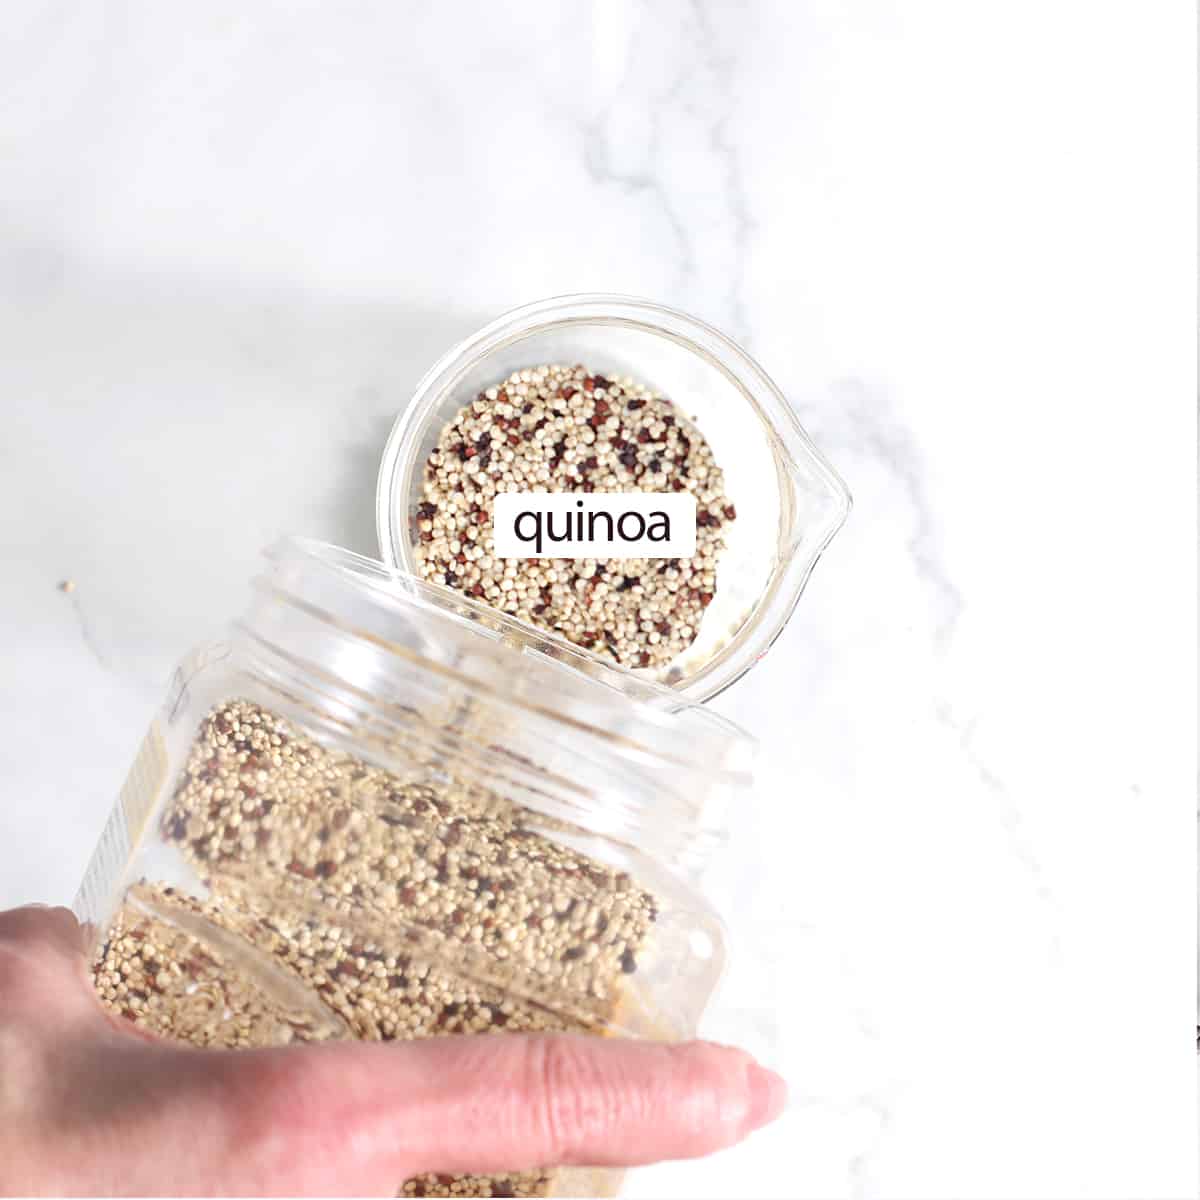 quinoa pouring from a container into a cup